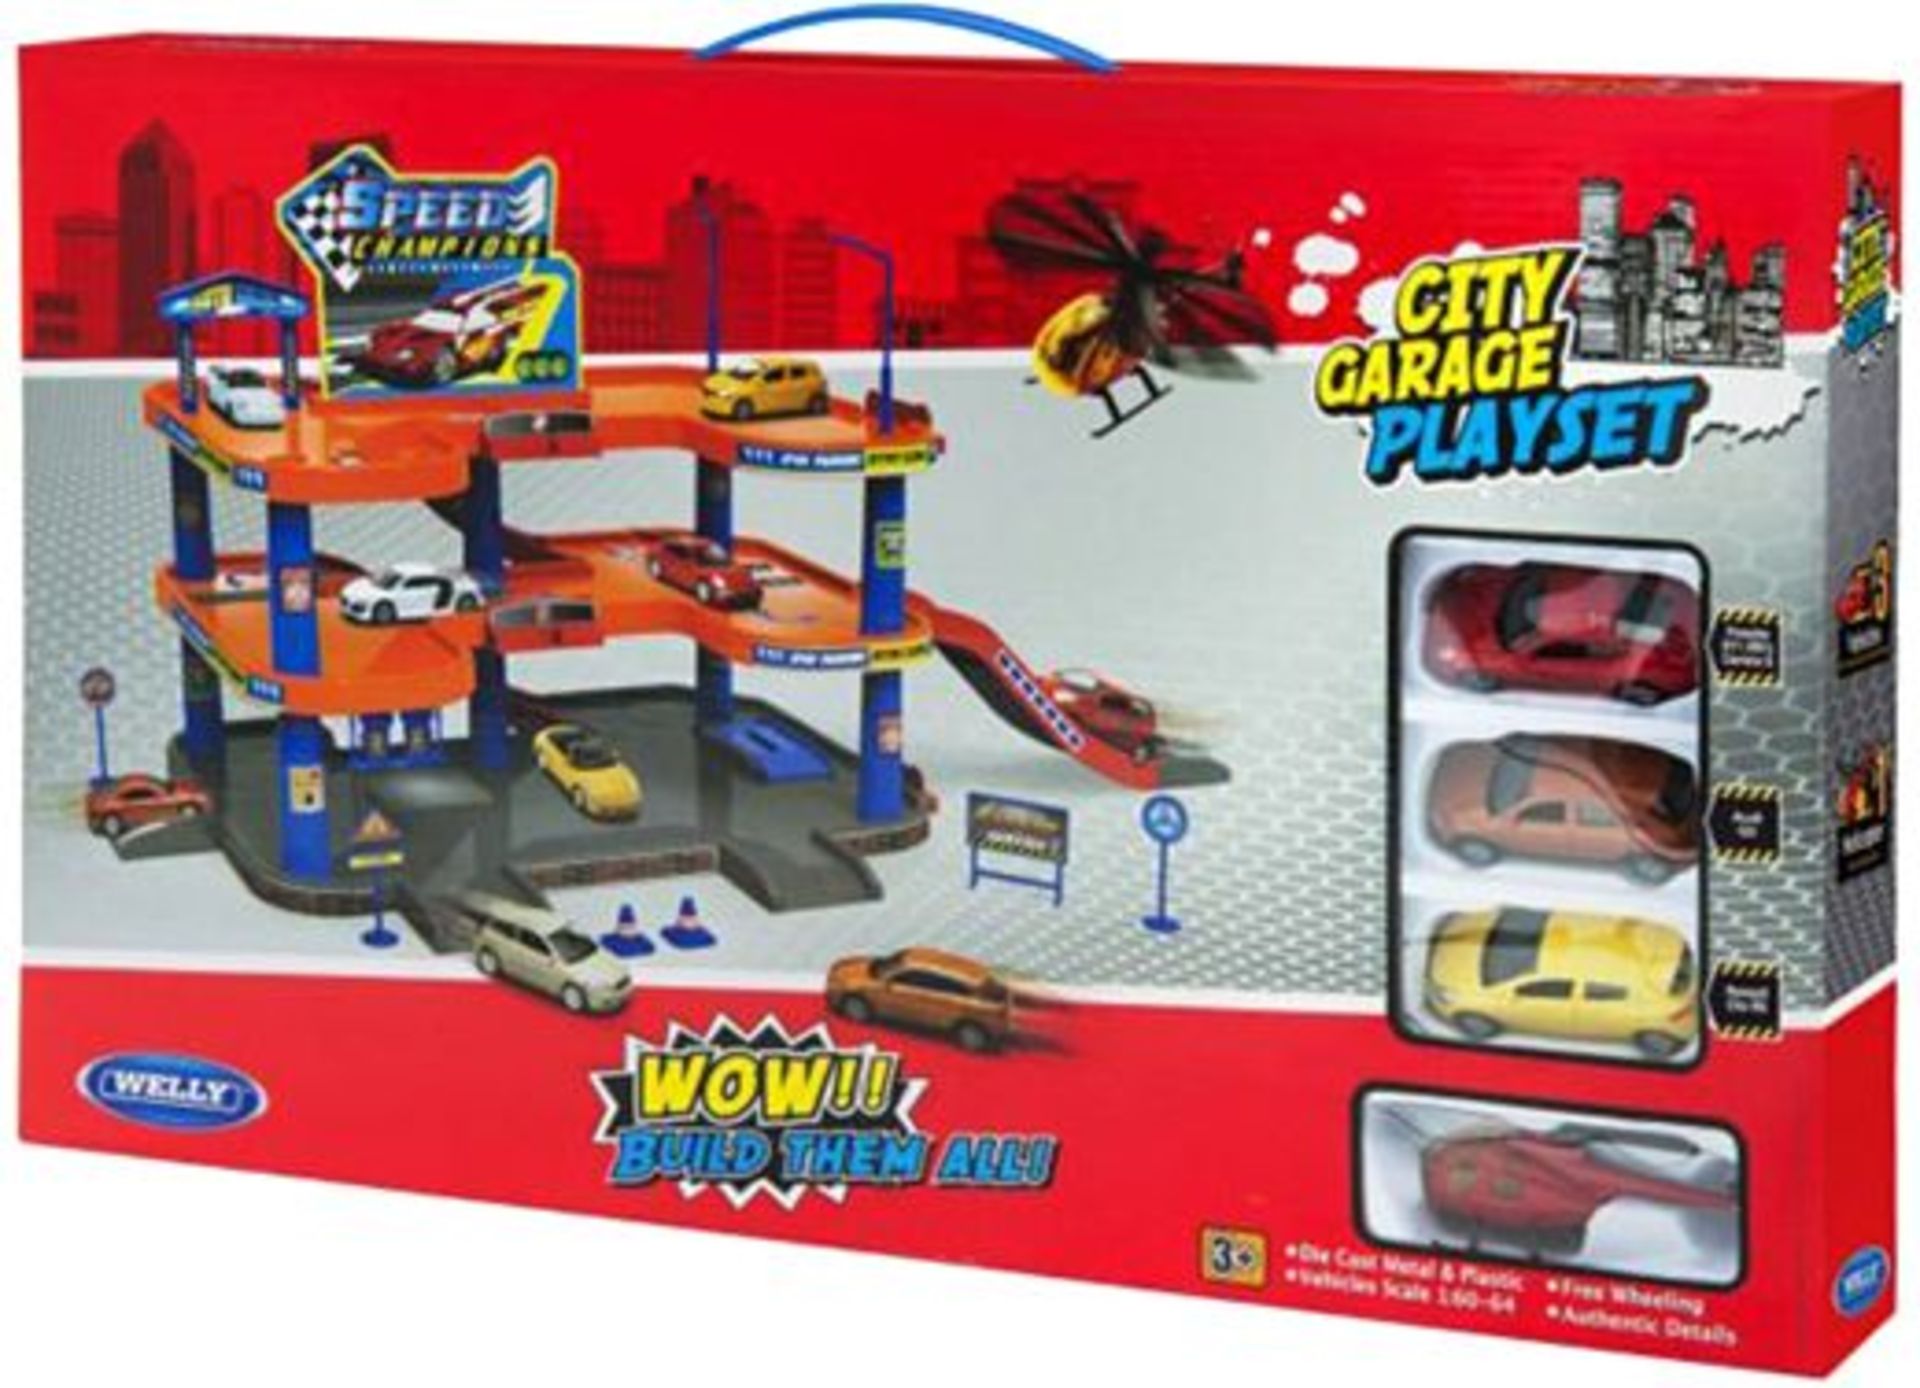 + VAT Brand New Garage With 3 Die-Cast Cars And 1 Helicopter (item is similar to picture)